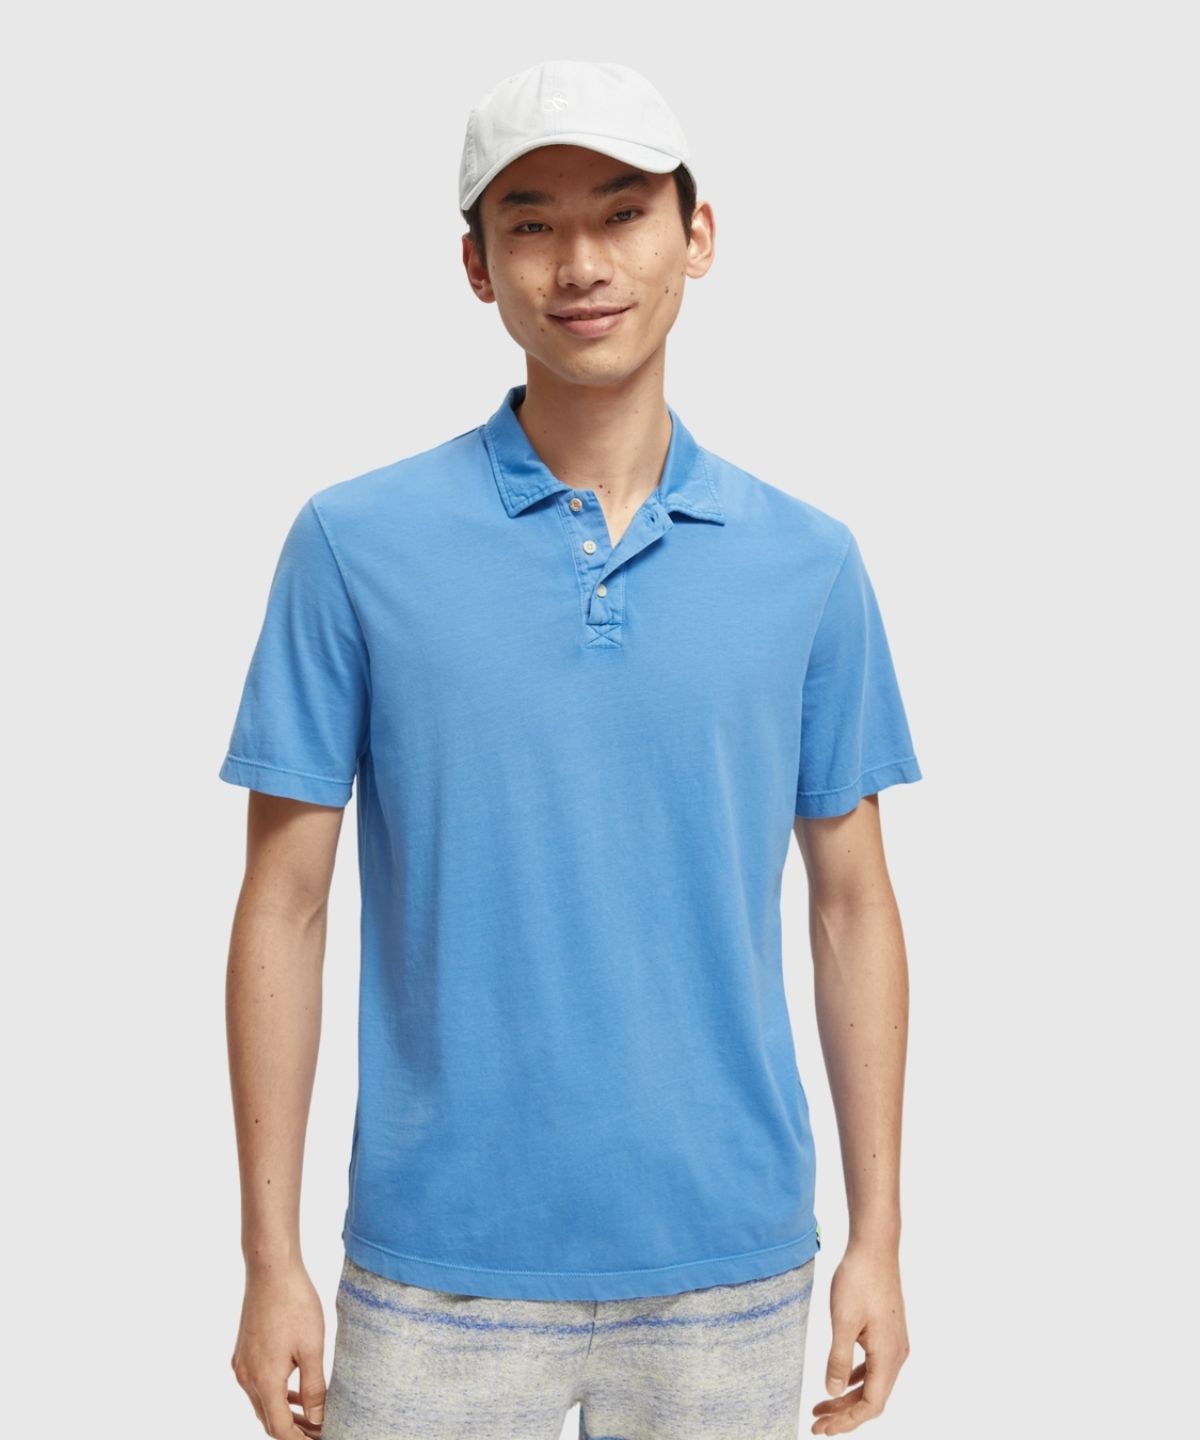 Garment-Dyed Jersey Polo In Organic Cotton